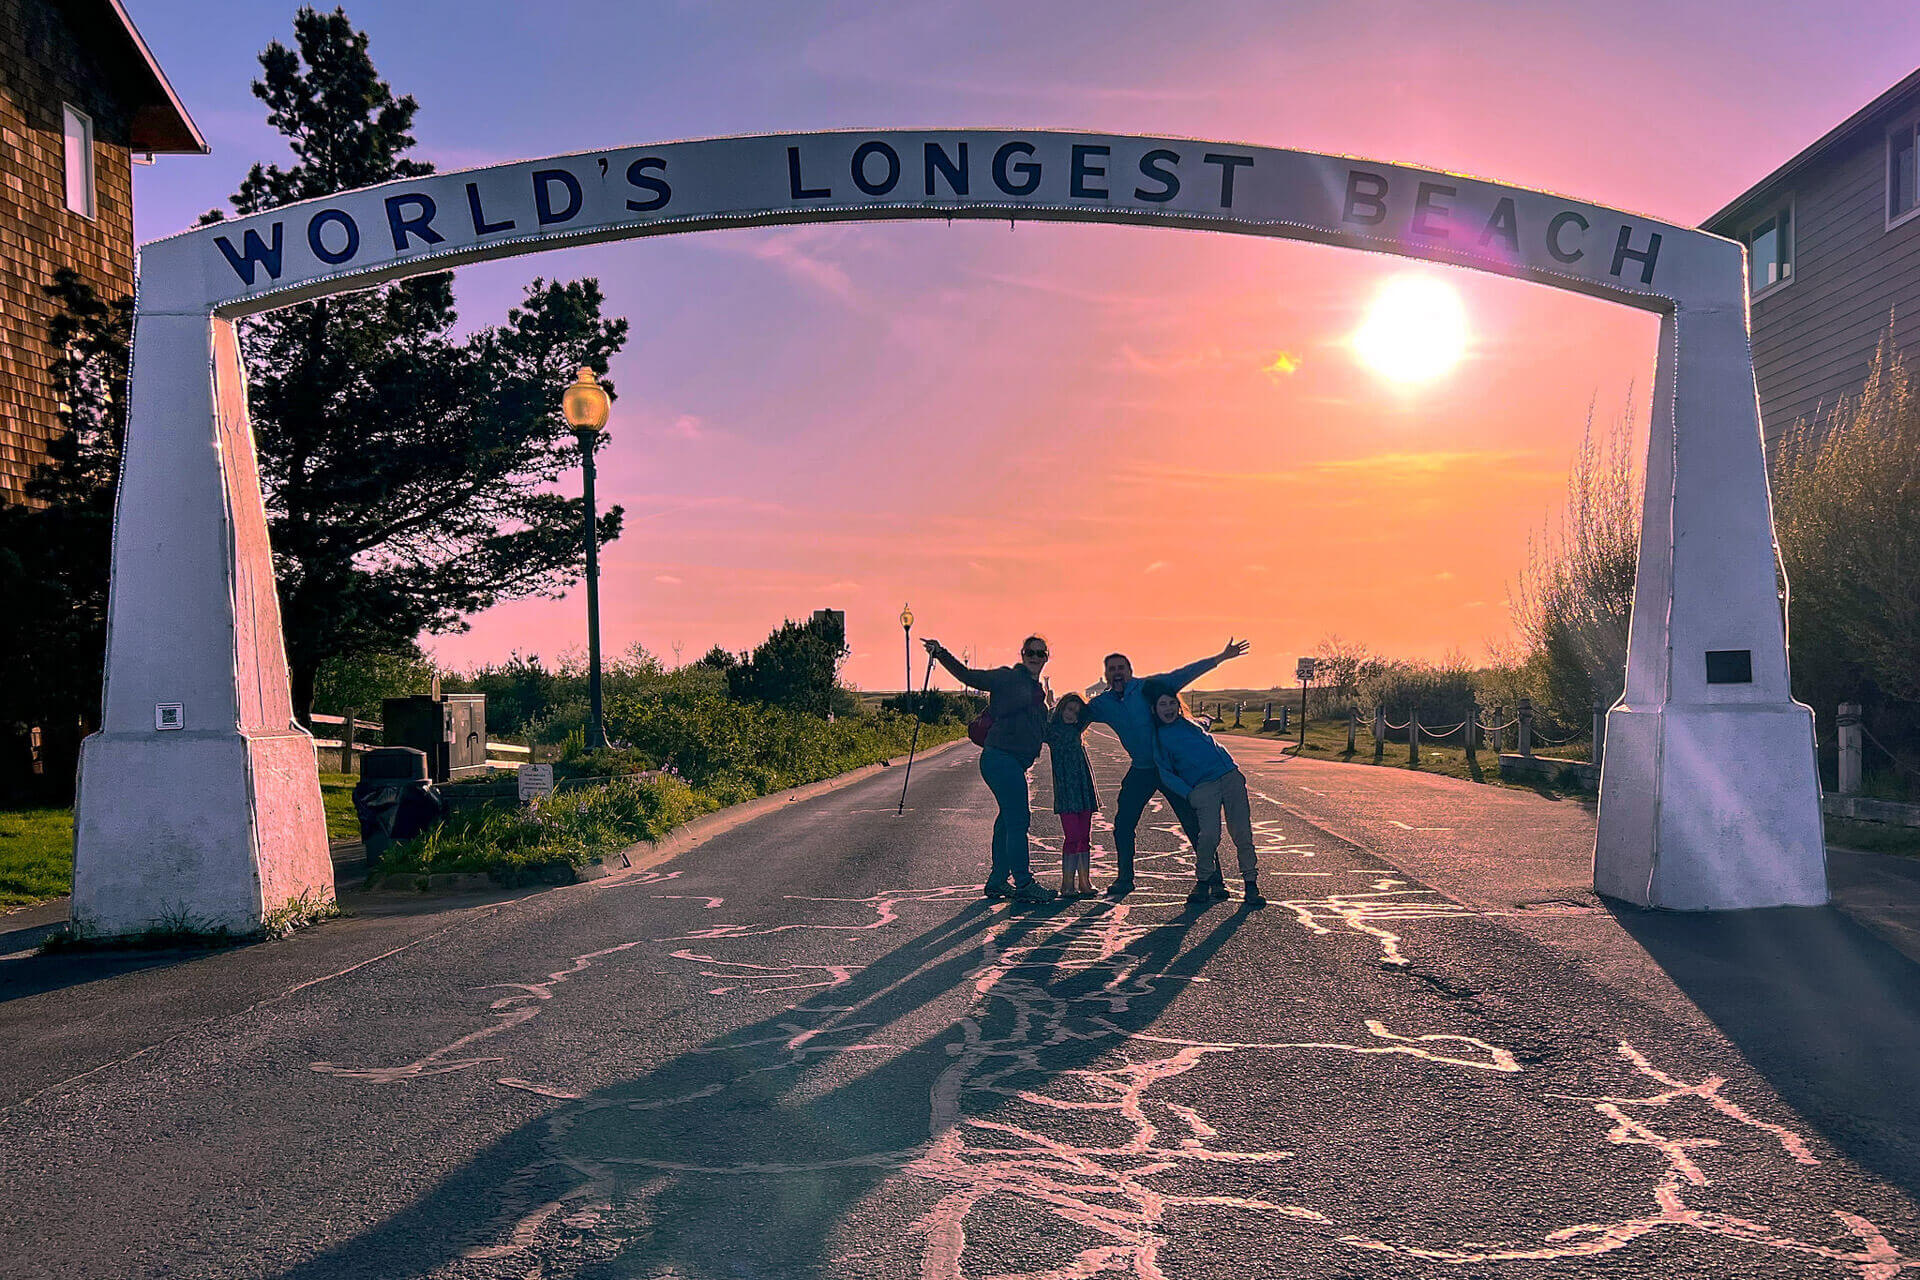 A husband and wife pose with their two children under an arch that reads "World's Longest Beach" during a family trip to Long Beach Washington